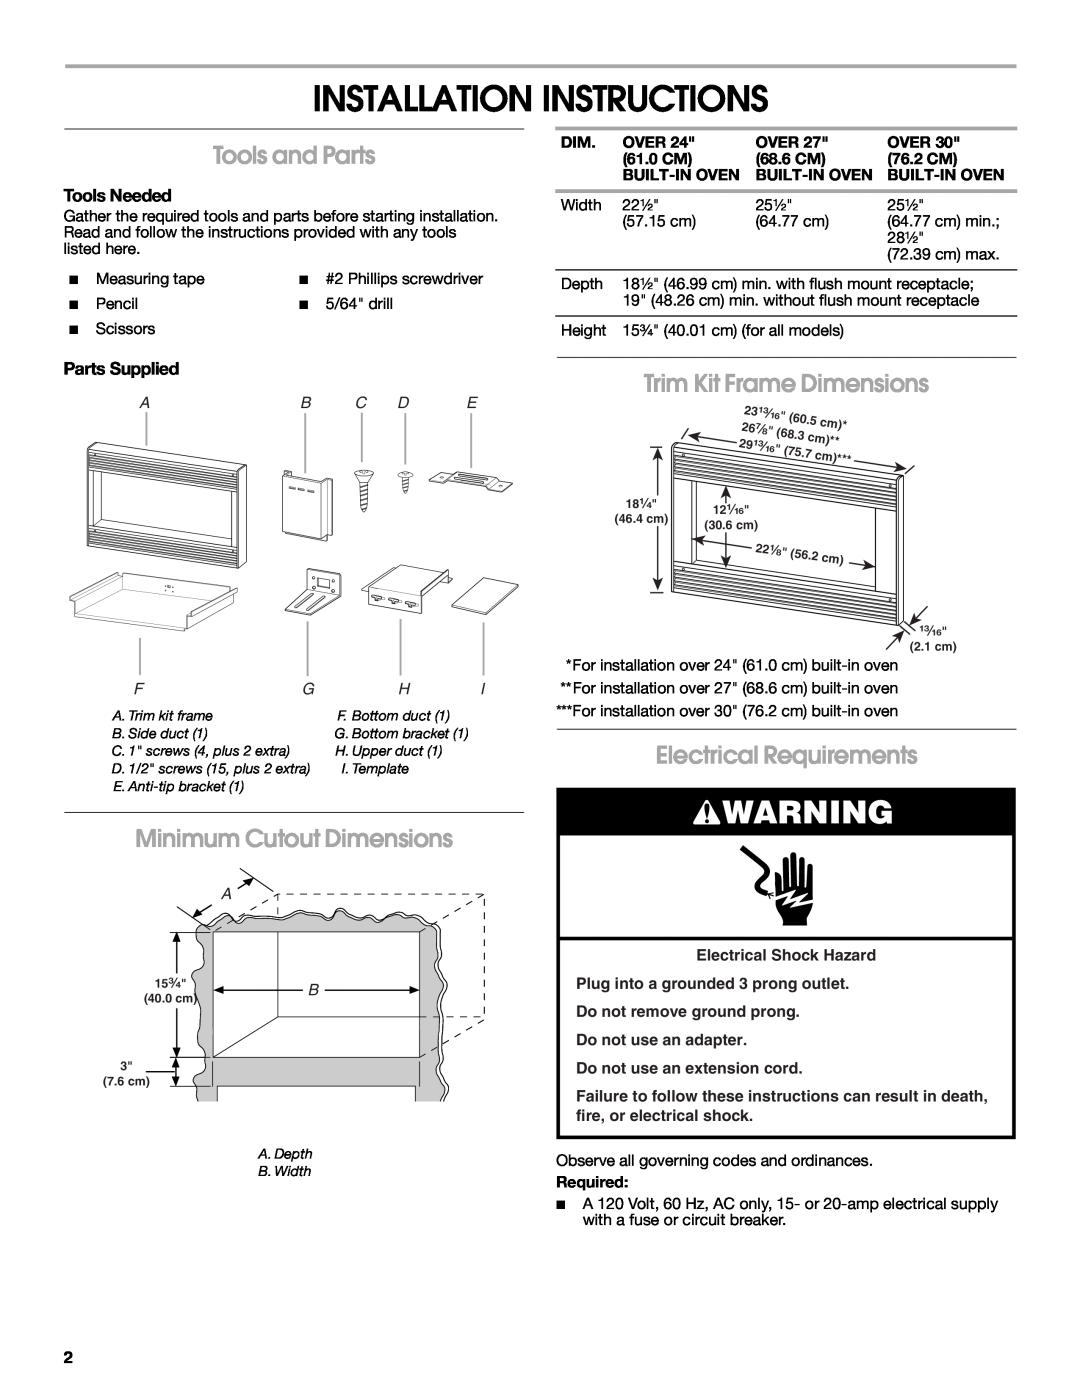 Whirlpool MK1154XV Installation Instructions, Tools and Parts, Minimum Cutout Dimensions, Trim Kit Frame Dimensions 